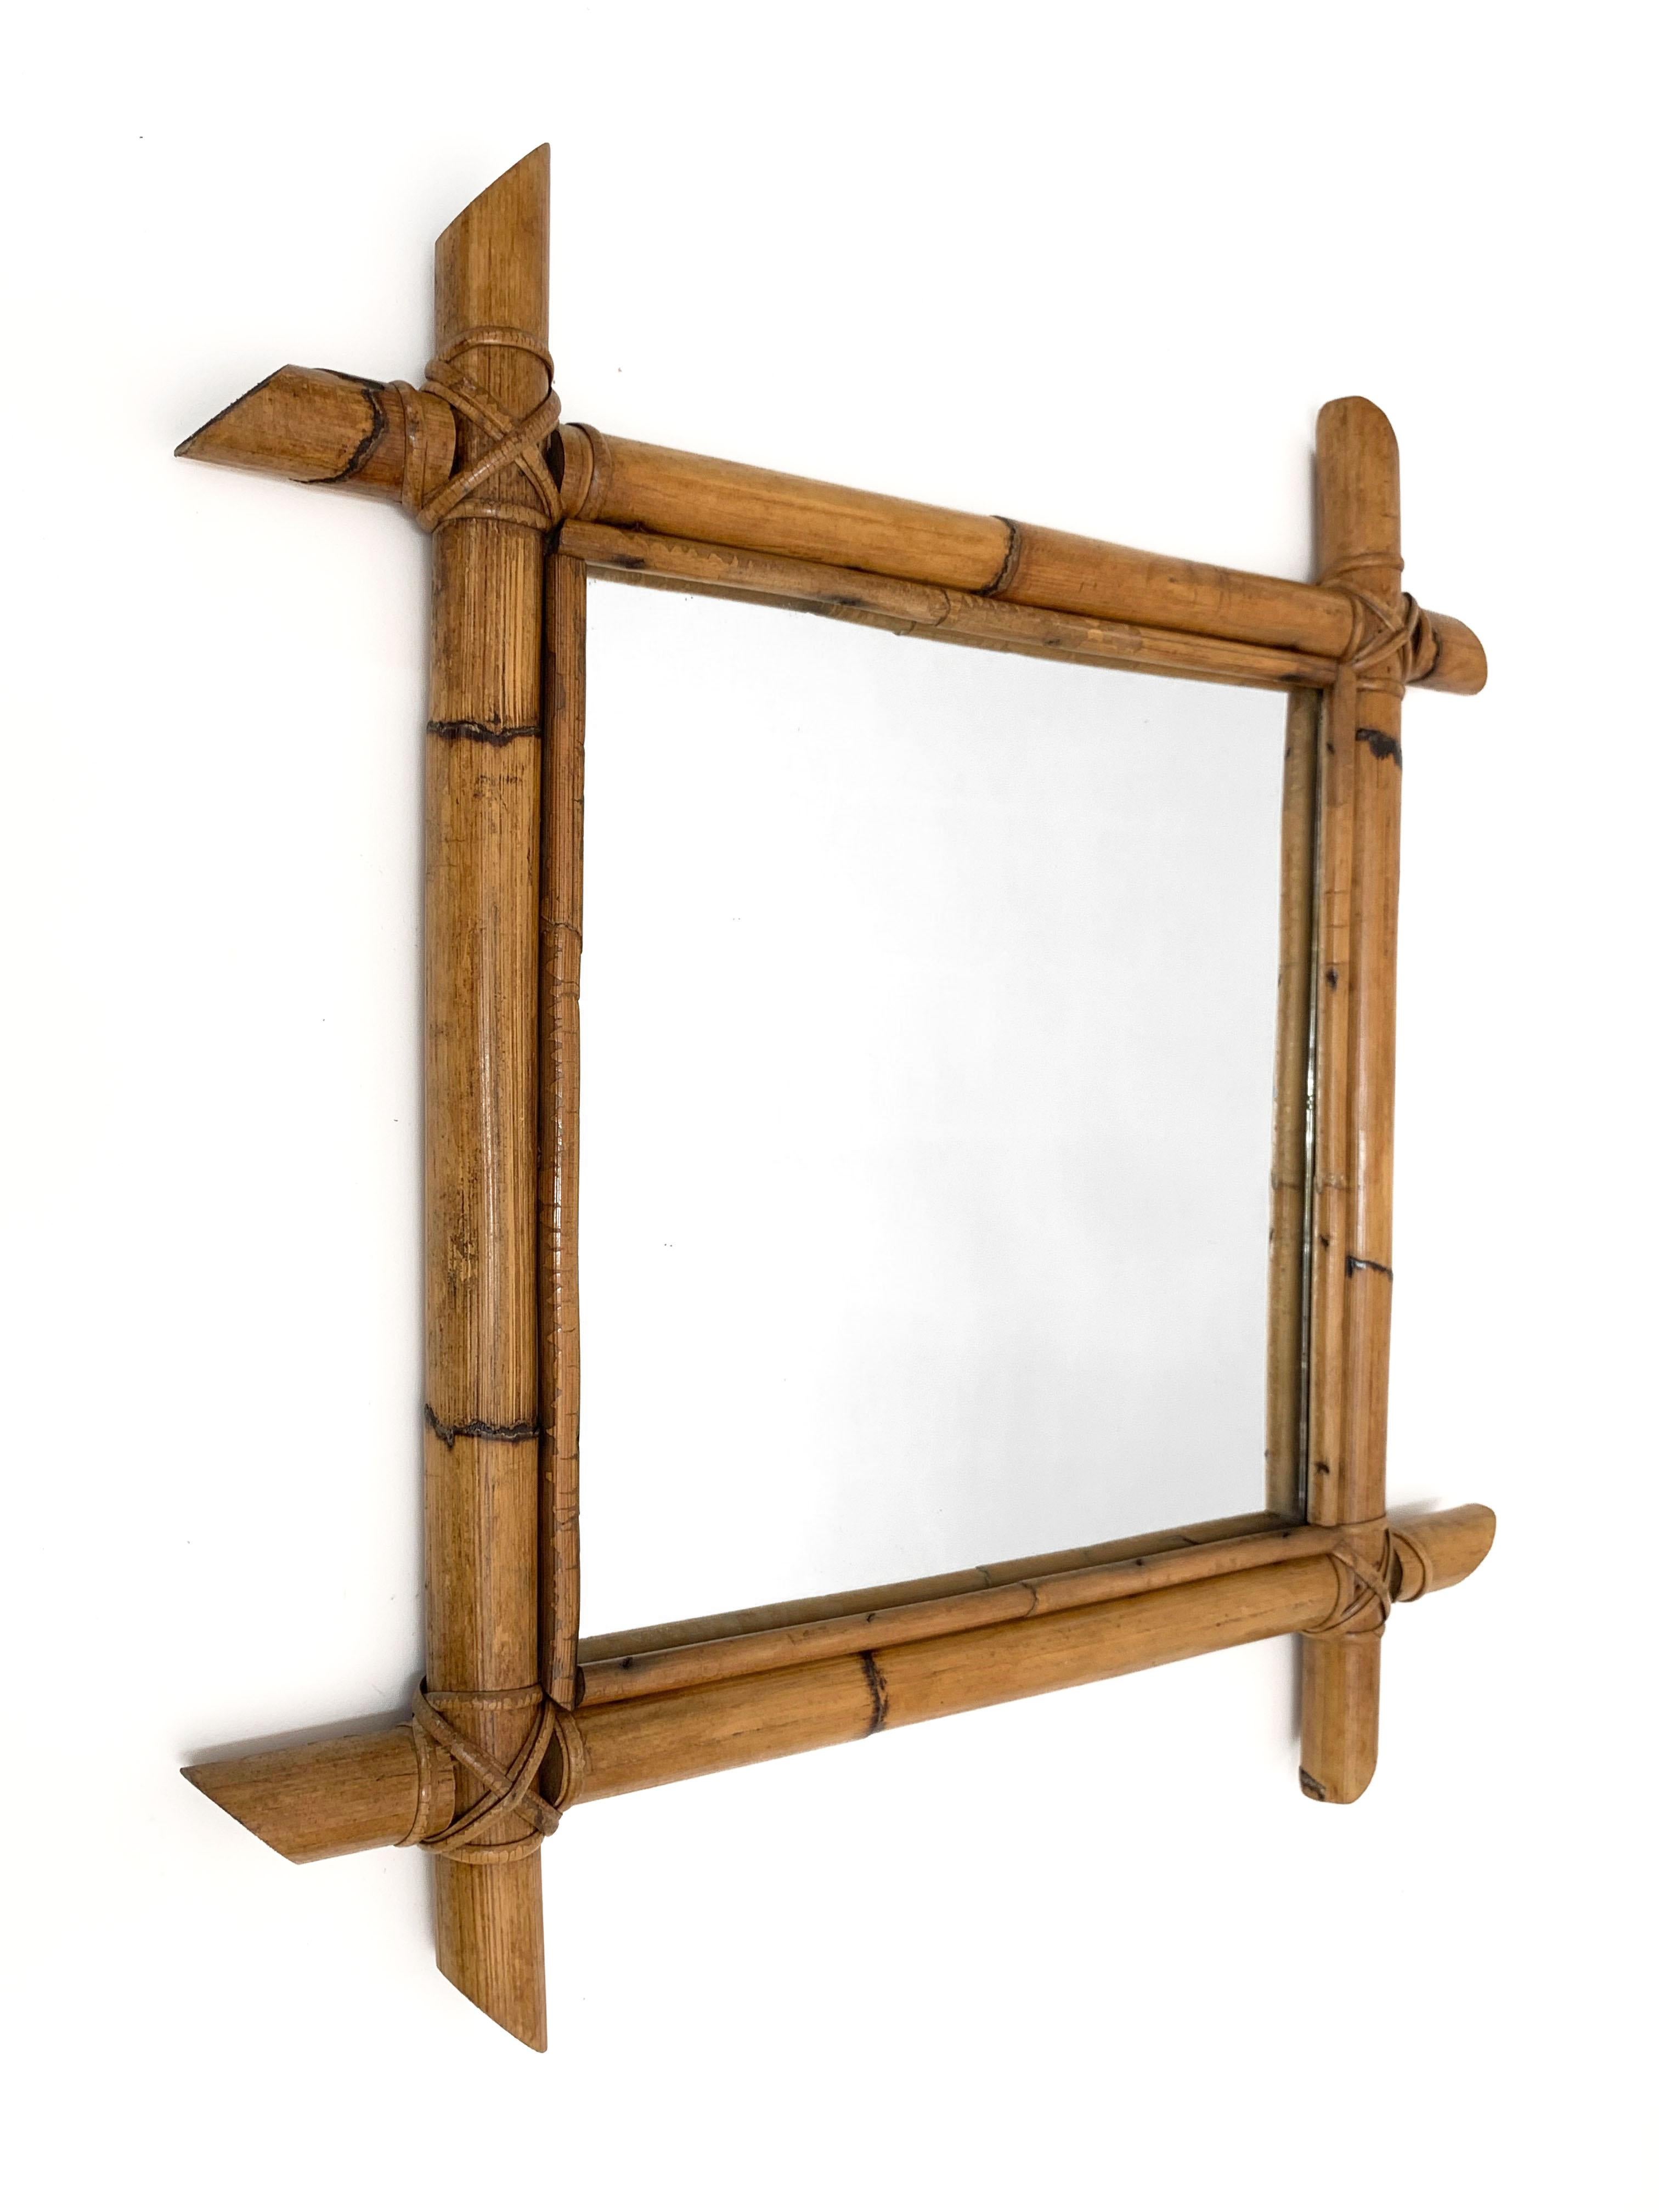 Amazing midcentury square mirror with bamboo woven wicker frame. This fantastic item was produced in Italy during the 1970s.

The way in which bamboo lines and glass integrate is fantastic and gives to this mirror an everlasting charm, the French